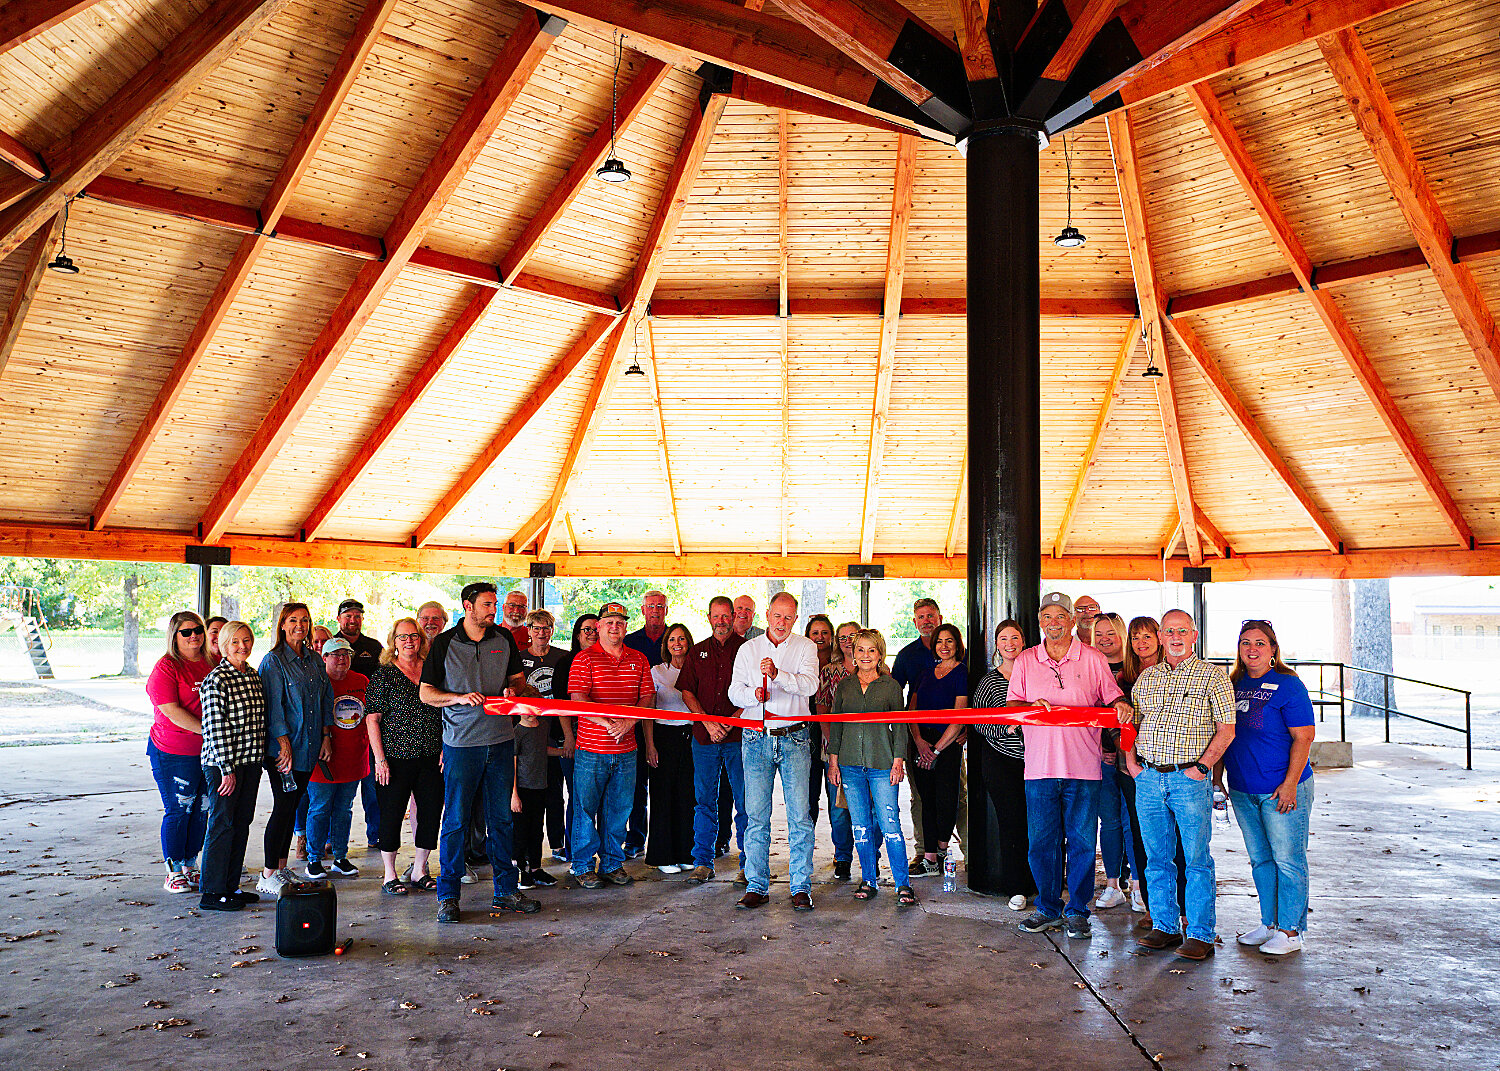 The newly-reconstructed pavilion at Jim Hogg City Park in Quitman was officially dedicated with a ribbon cutting Friday afternoon. Mayor Randy Dunn did the honors.